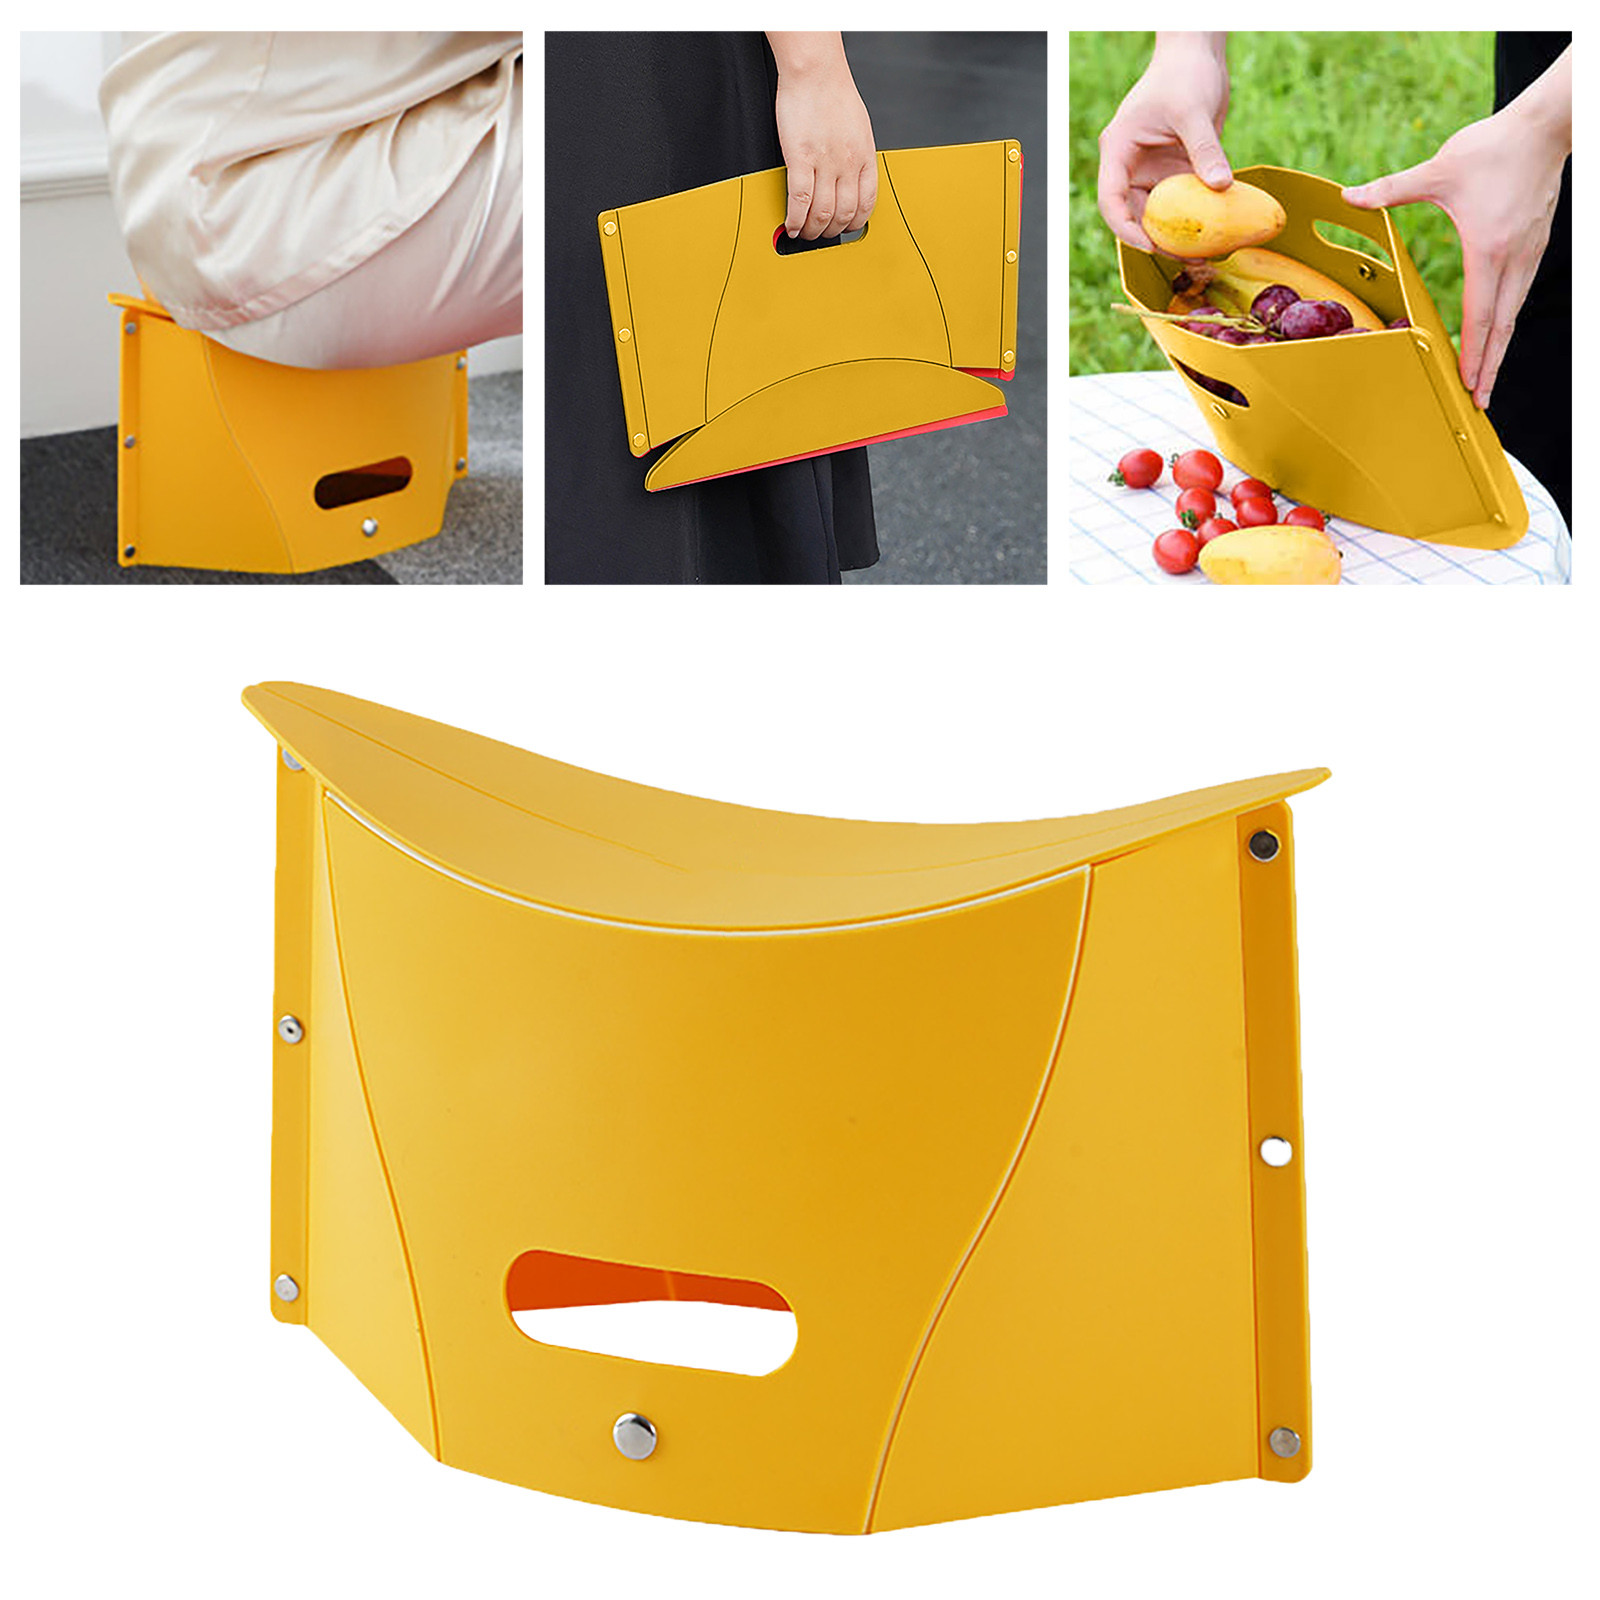 ⚡⚡Last Day Promotion 48% OFF - Multifunctional Portable Drain Basket&Folding Stool🔥BUY 2 GET 1 FREE